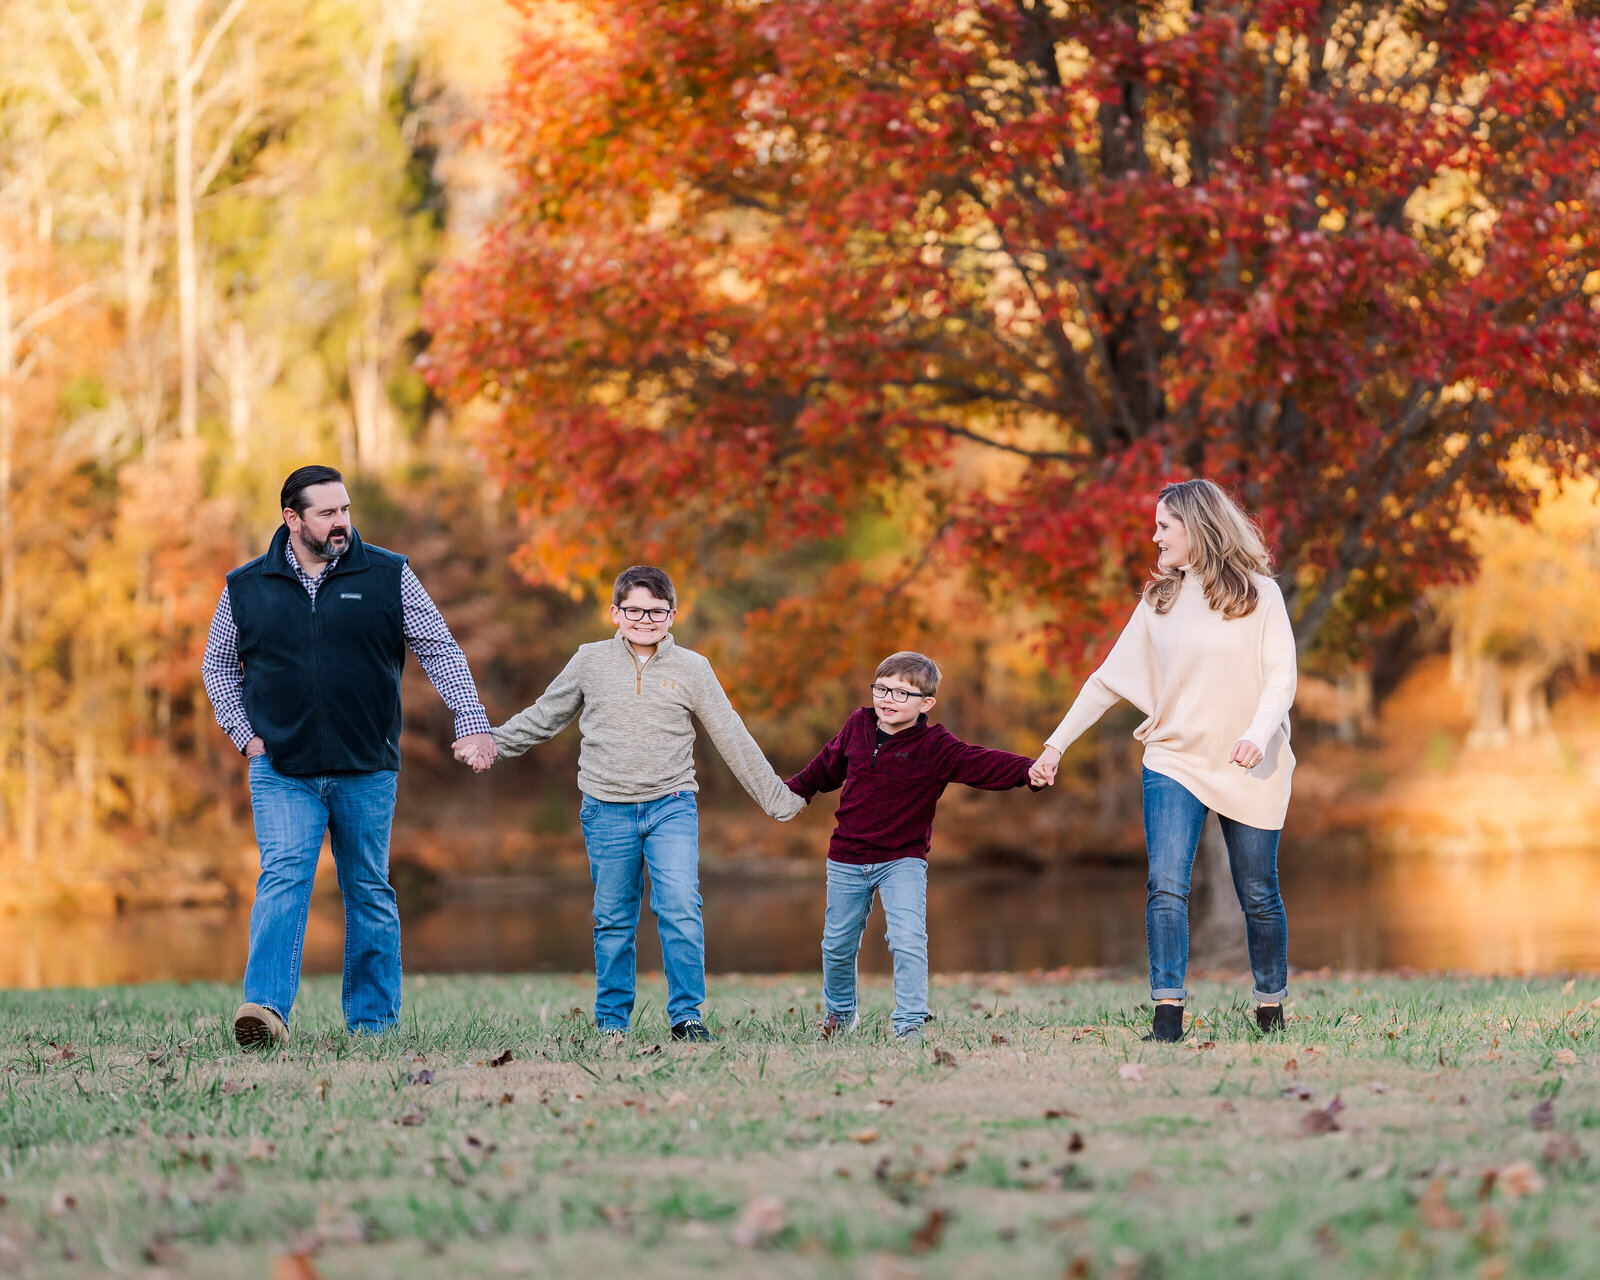 Family walks in the leaves together in the fall